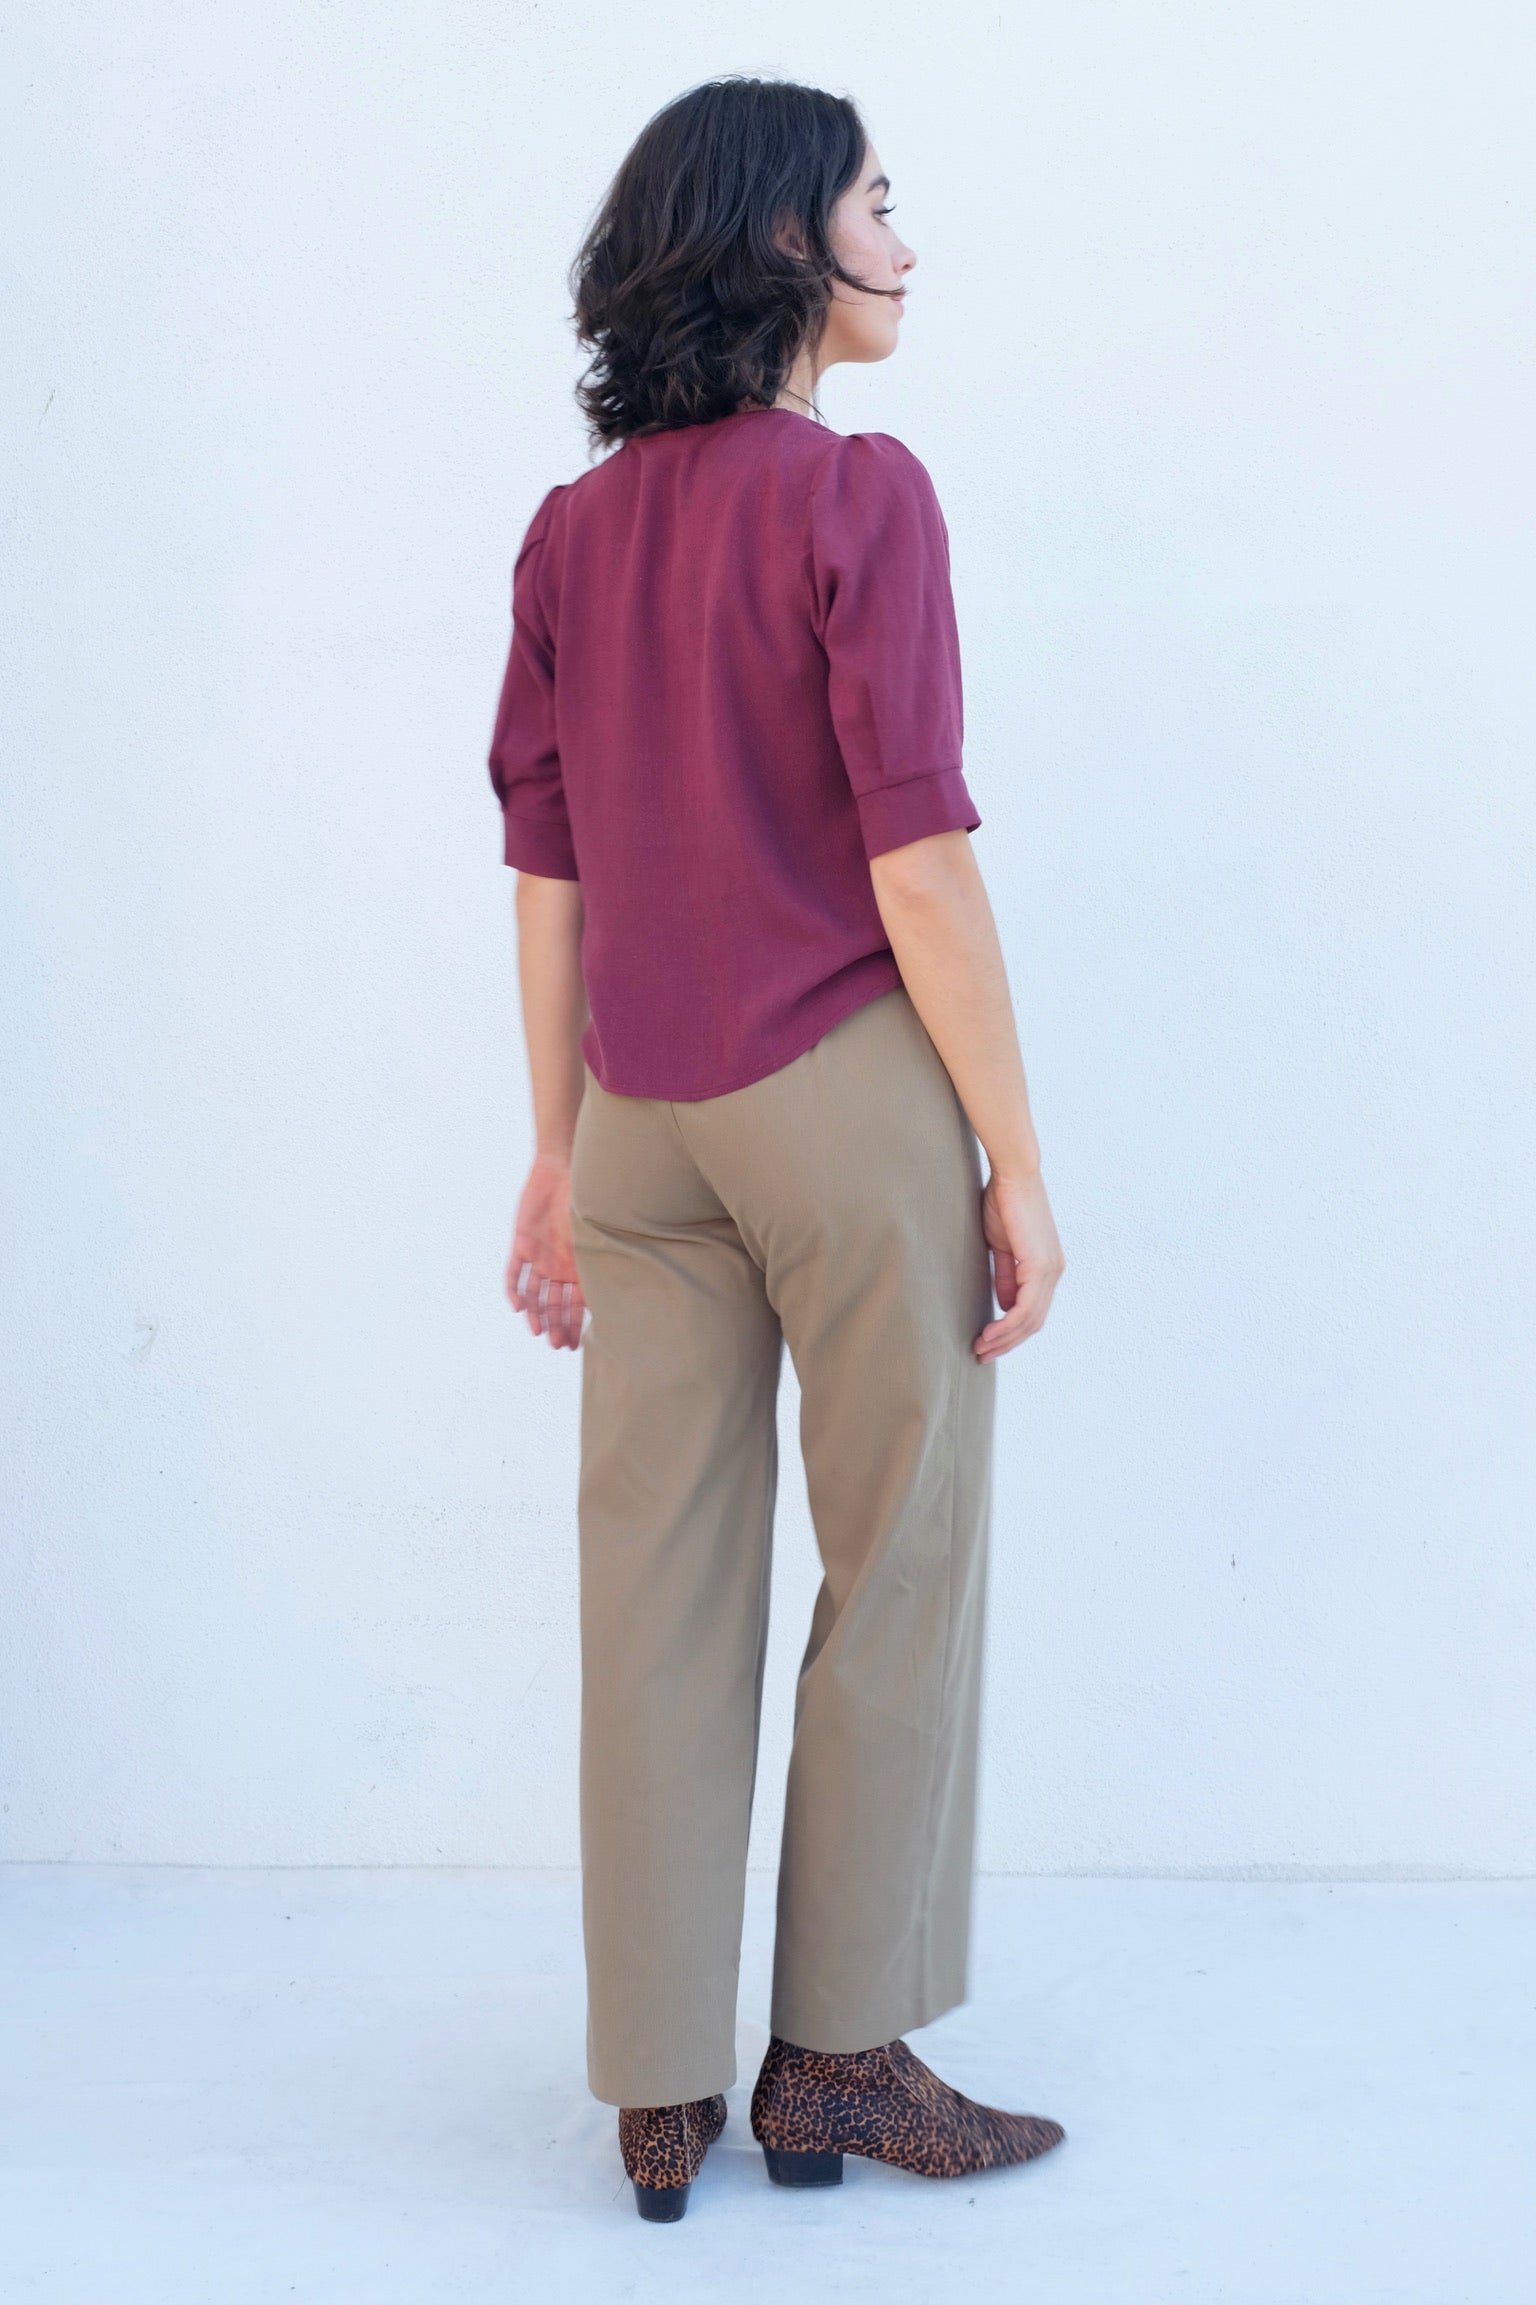 Dagg and Stacey Enora pant, Khaki